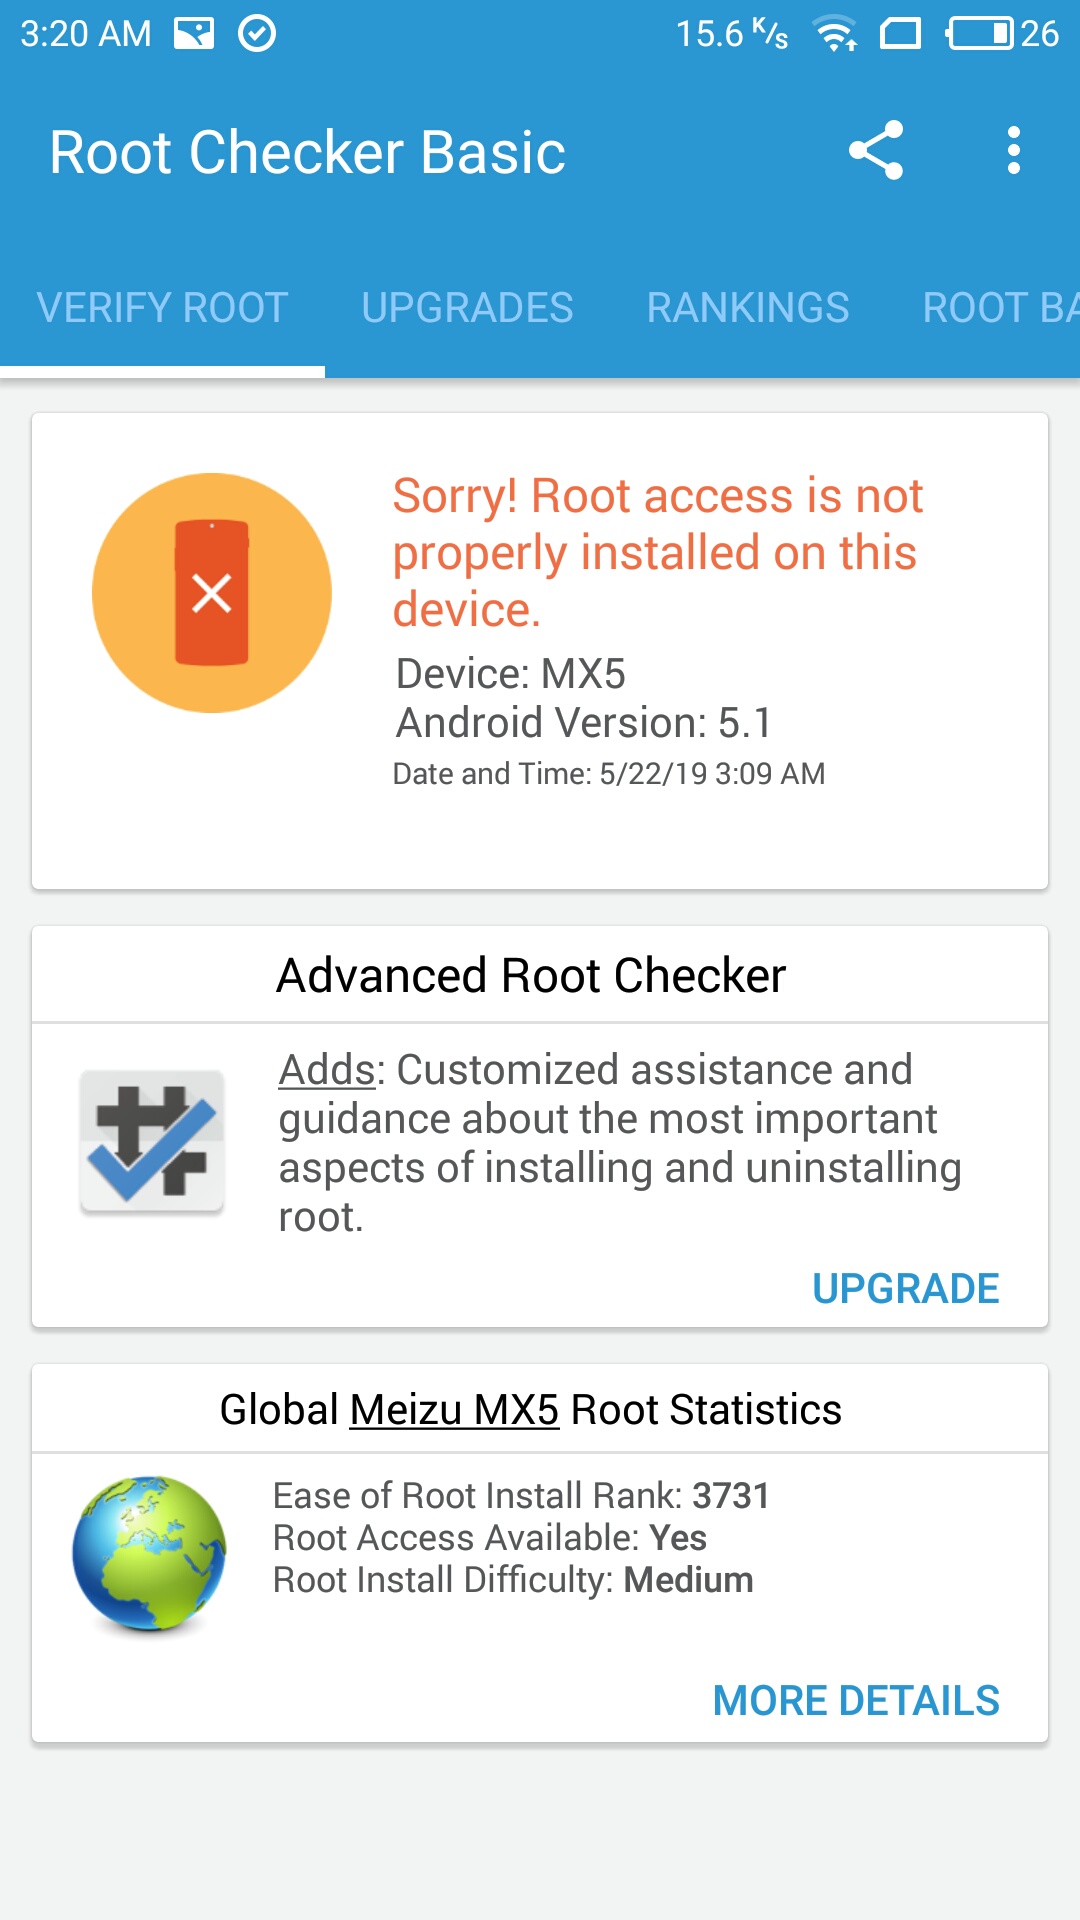 But here i dont have root access